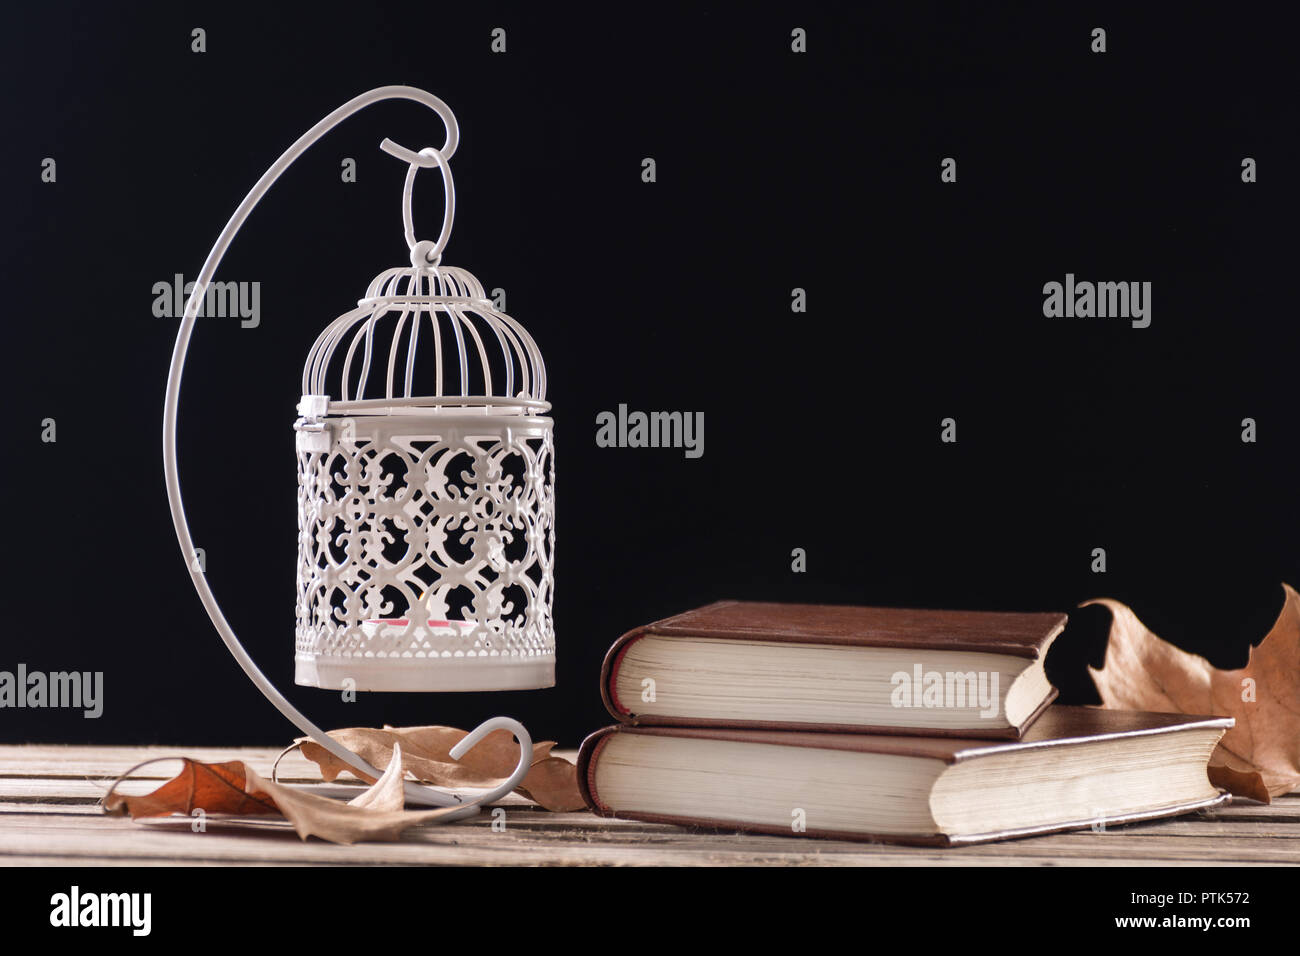 Retro decorative cage with candle and old books on wooden desk with fallen dry leaf, black background. Education and autumn concept. Close up Stock Photo